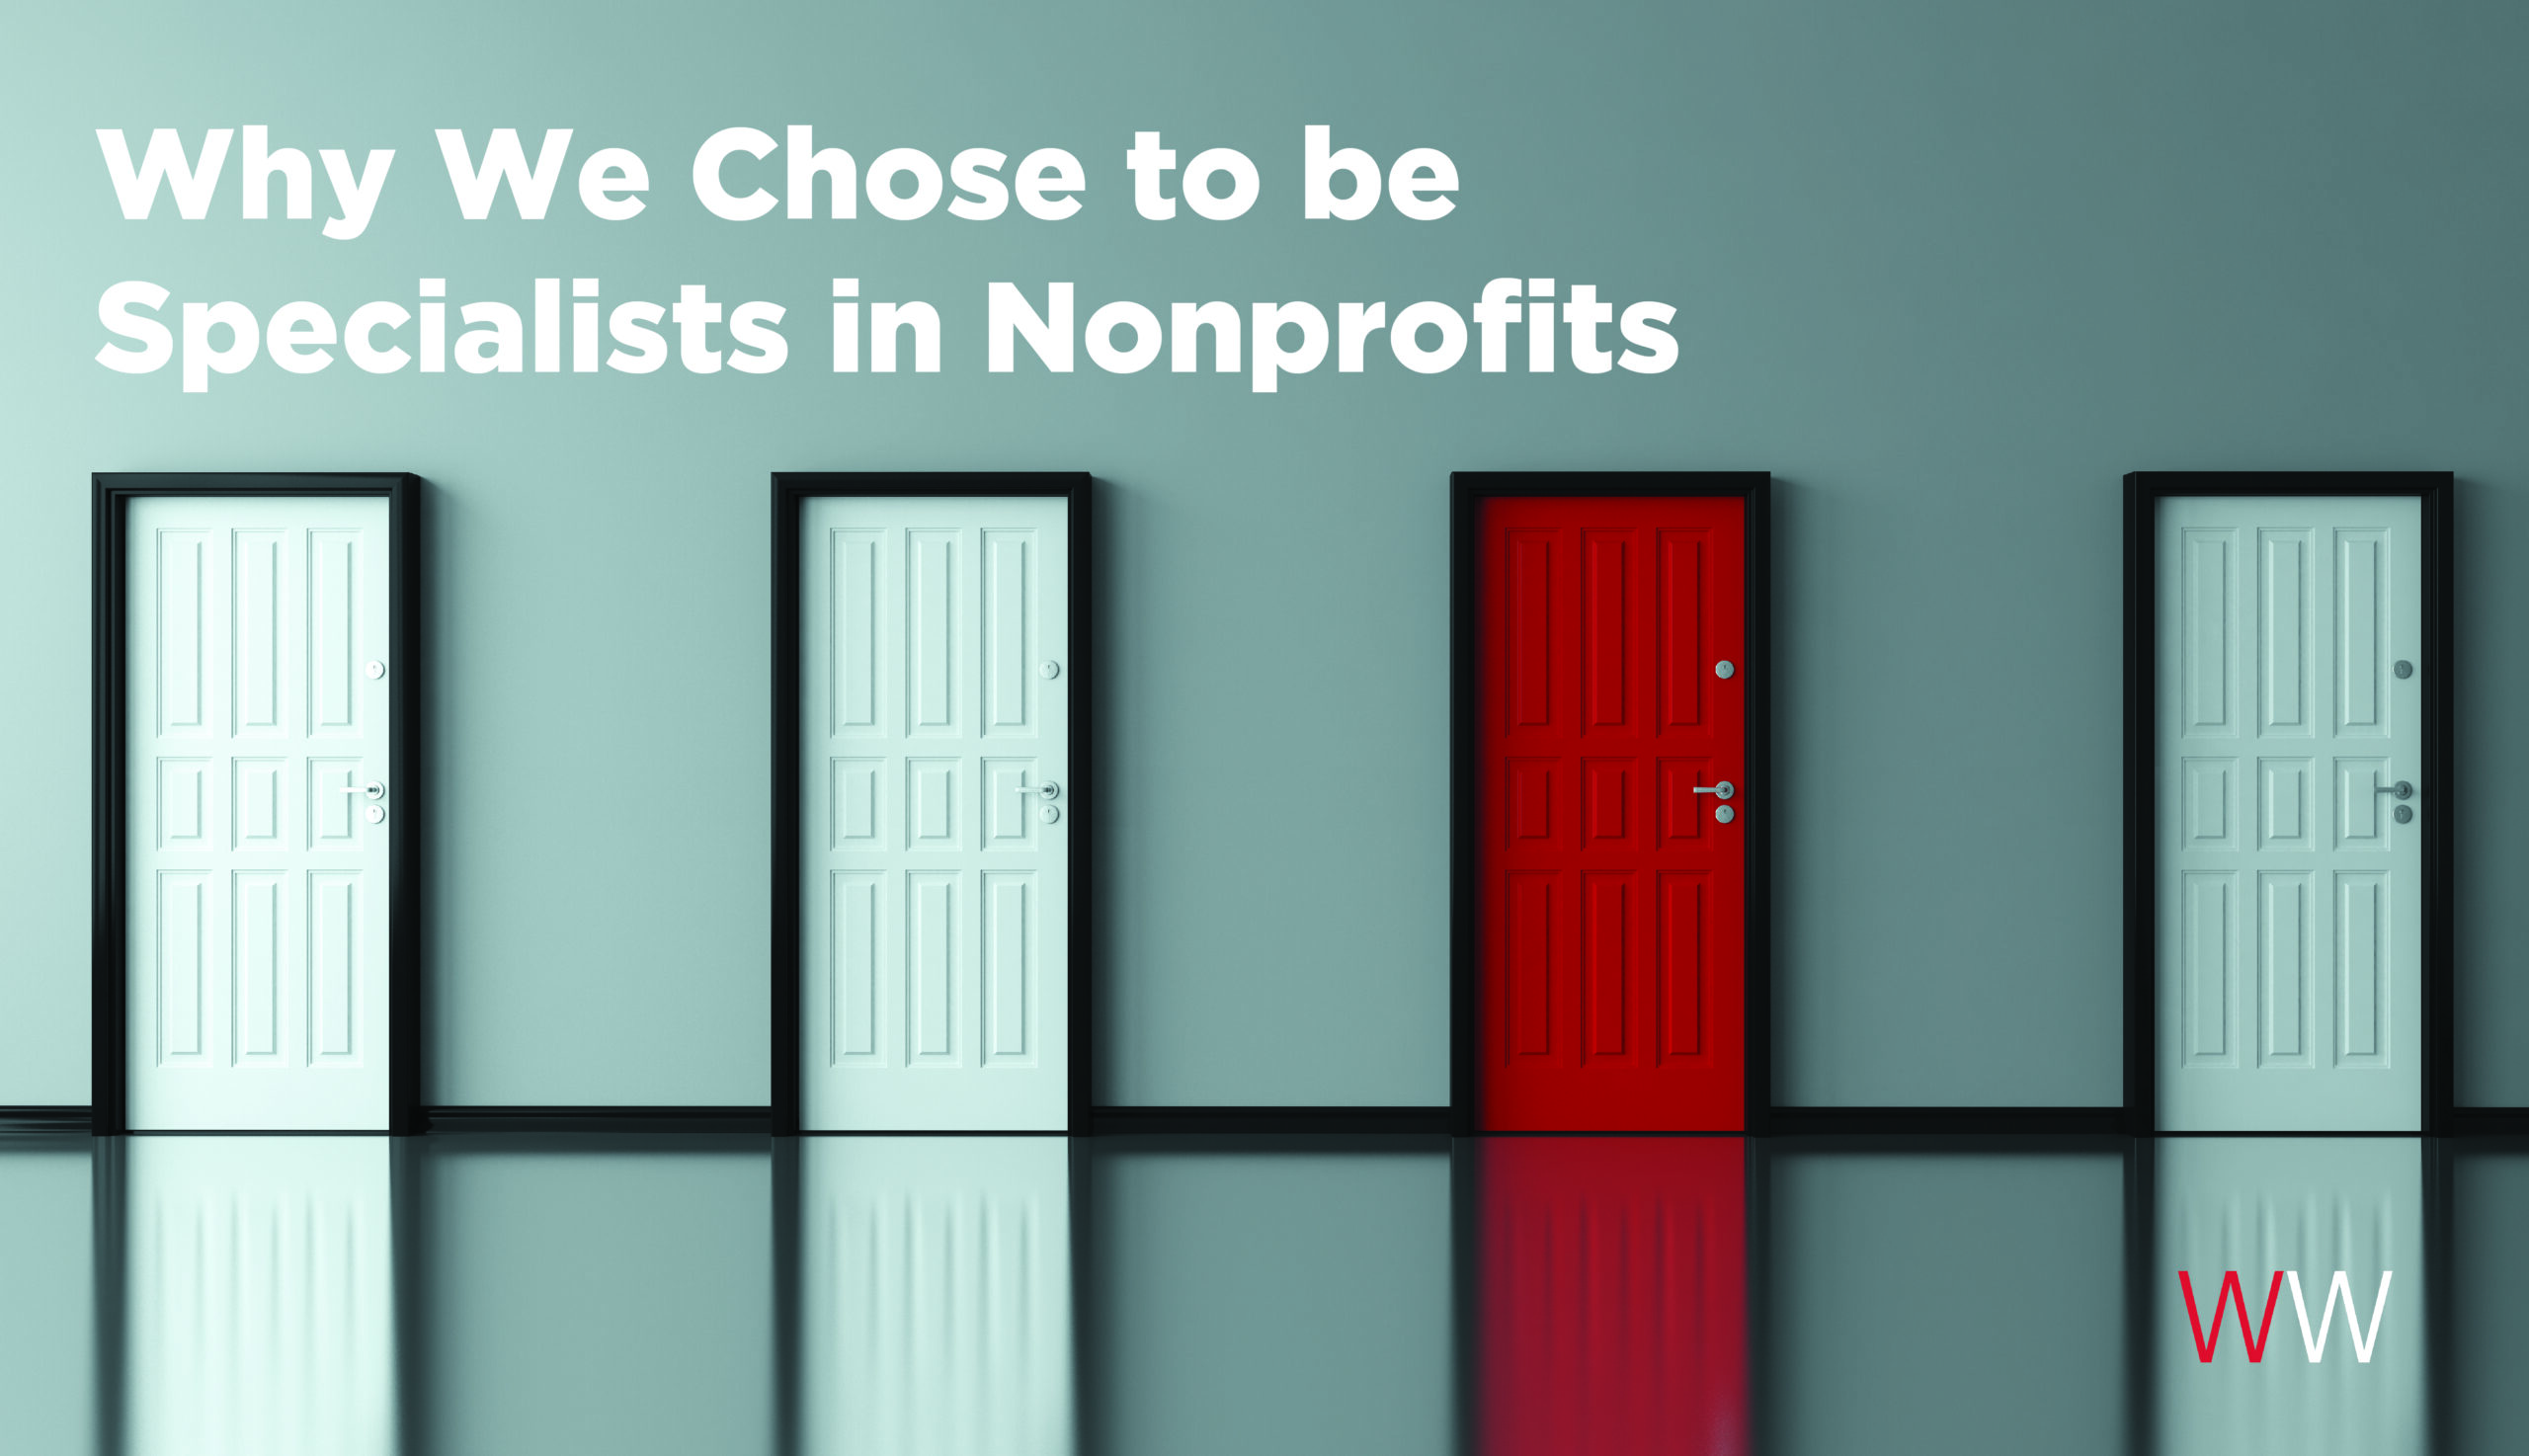 Why We Chose to Specialize in Nonprofits